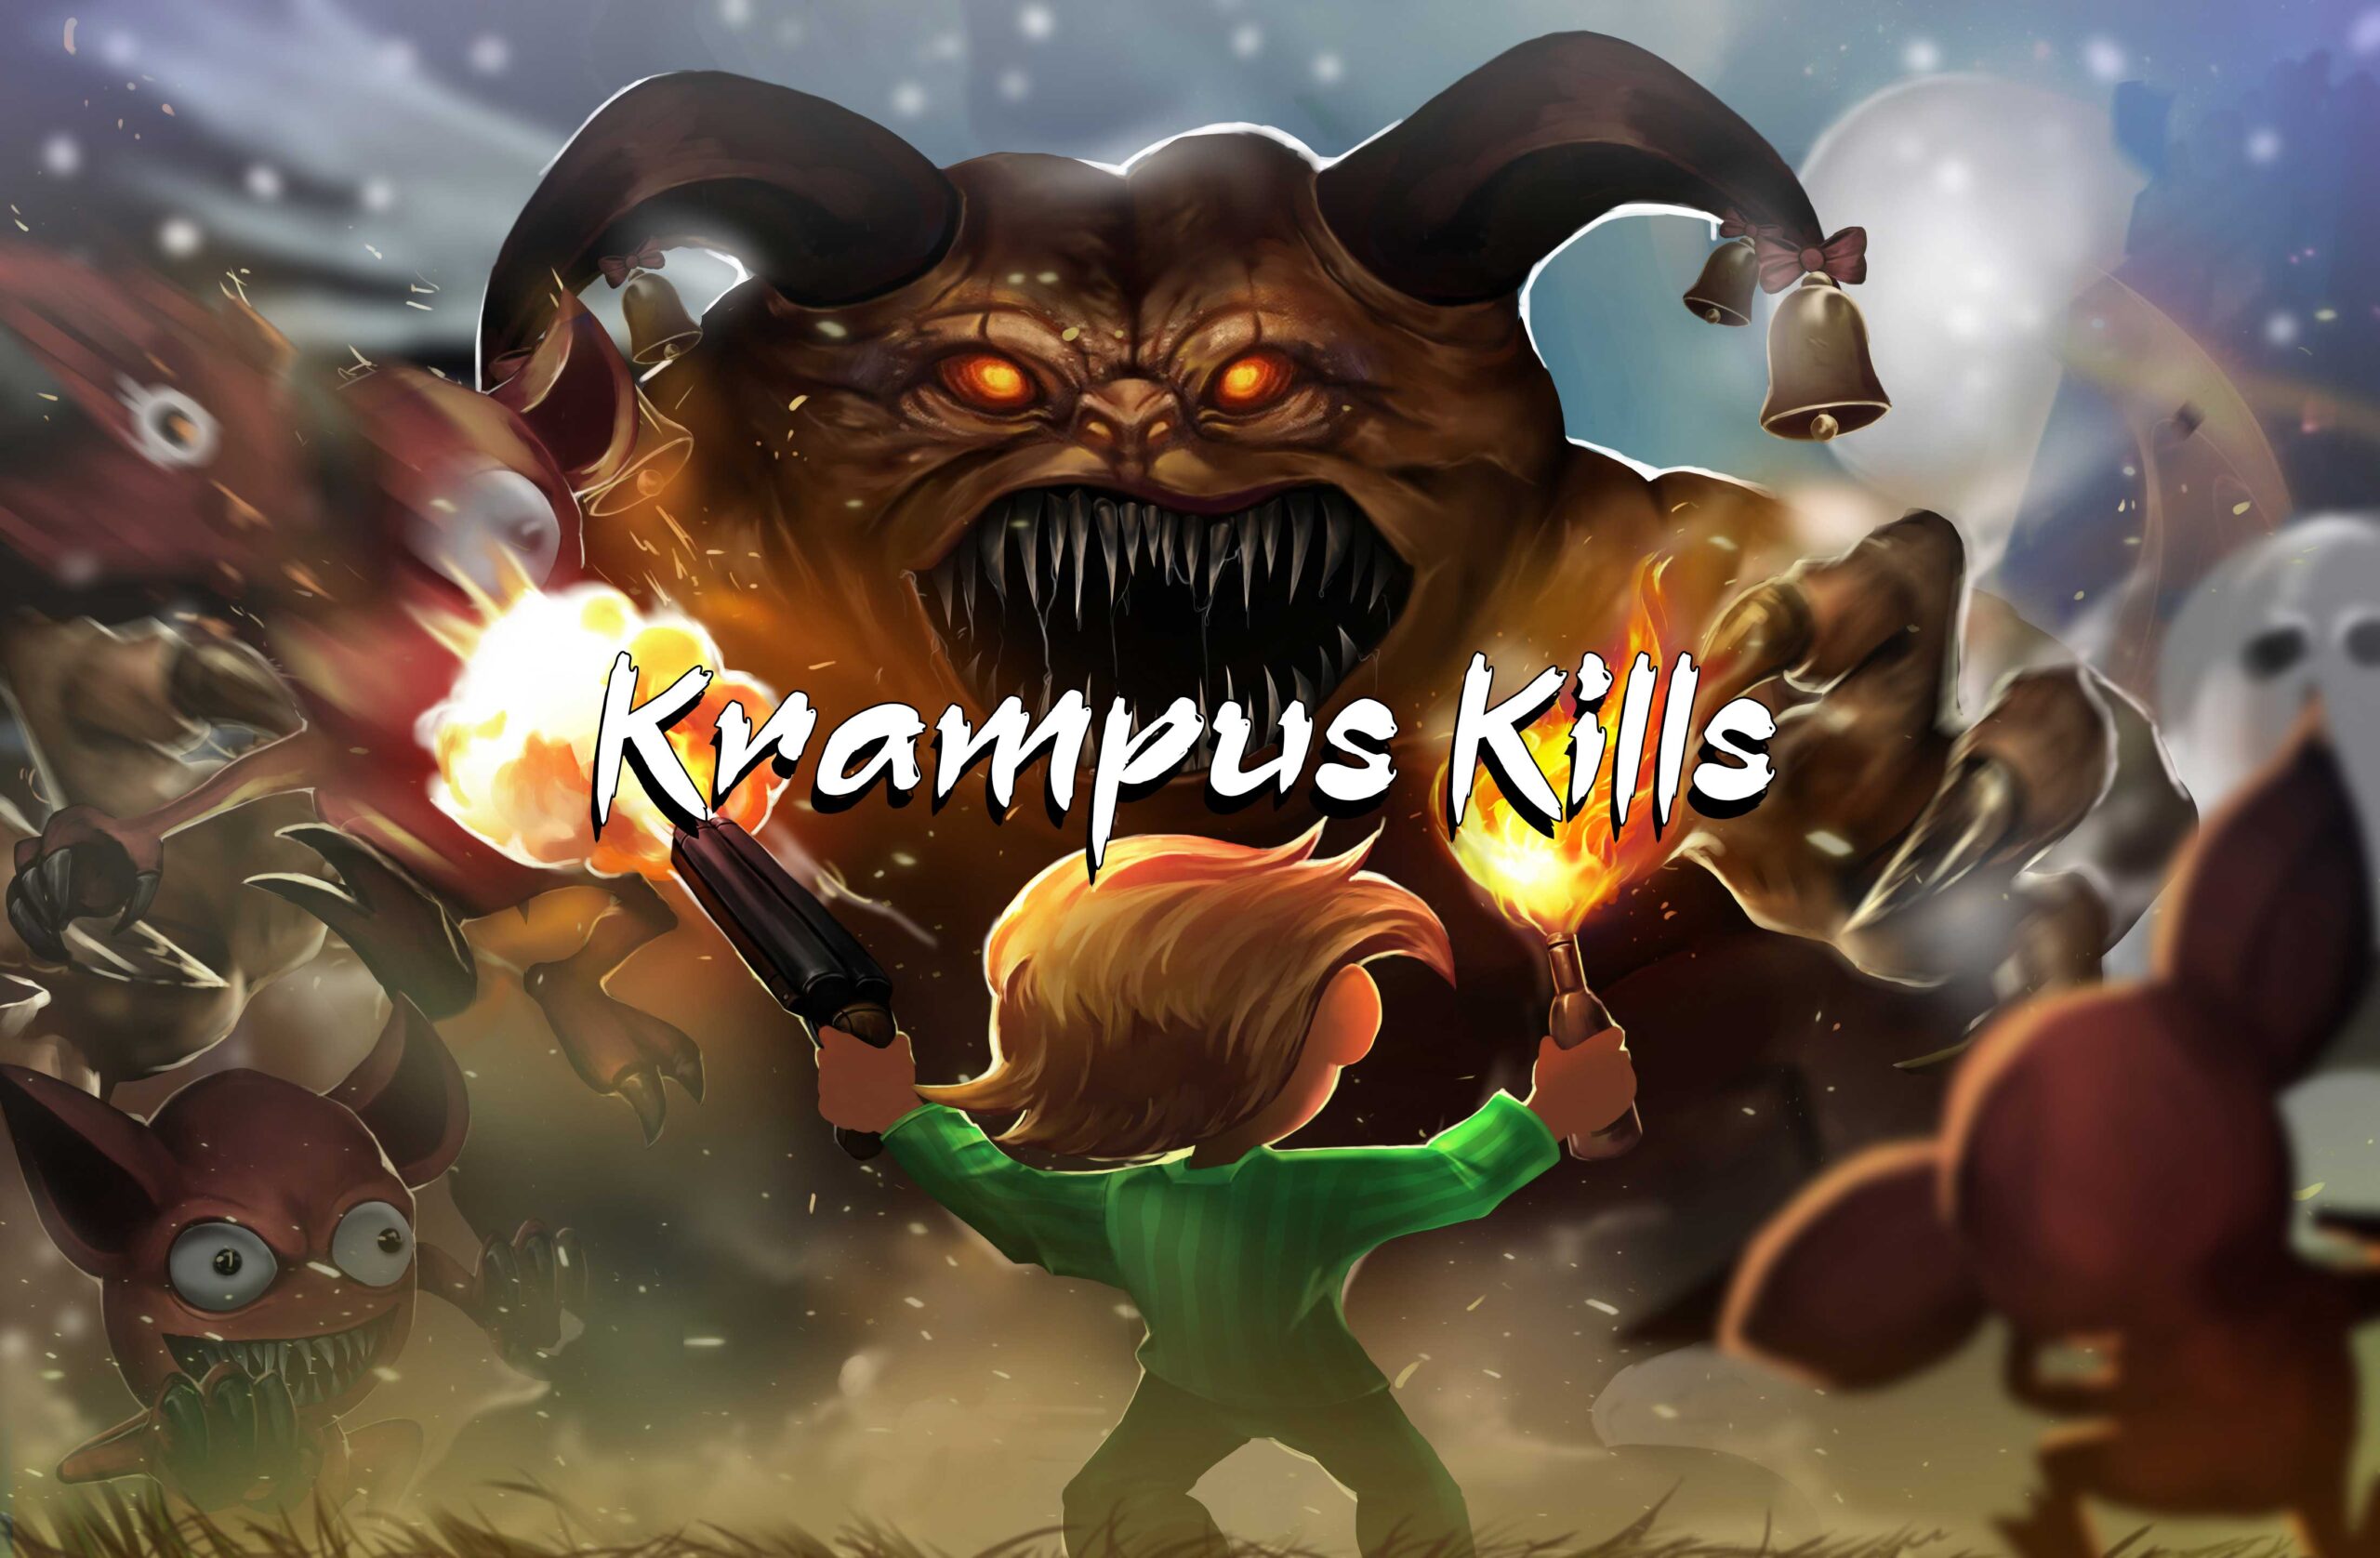 Krampus Kills, the Scariest Christmas Game of All Time?